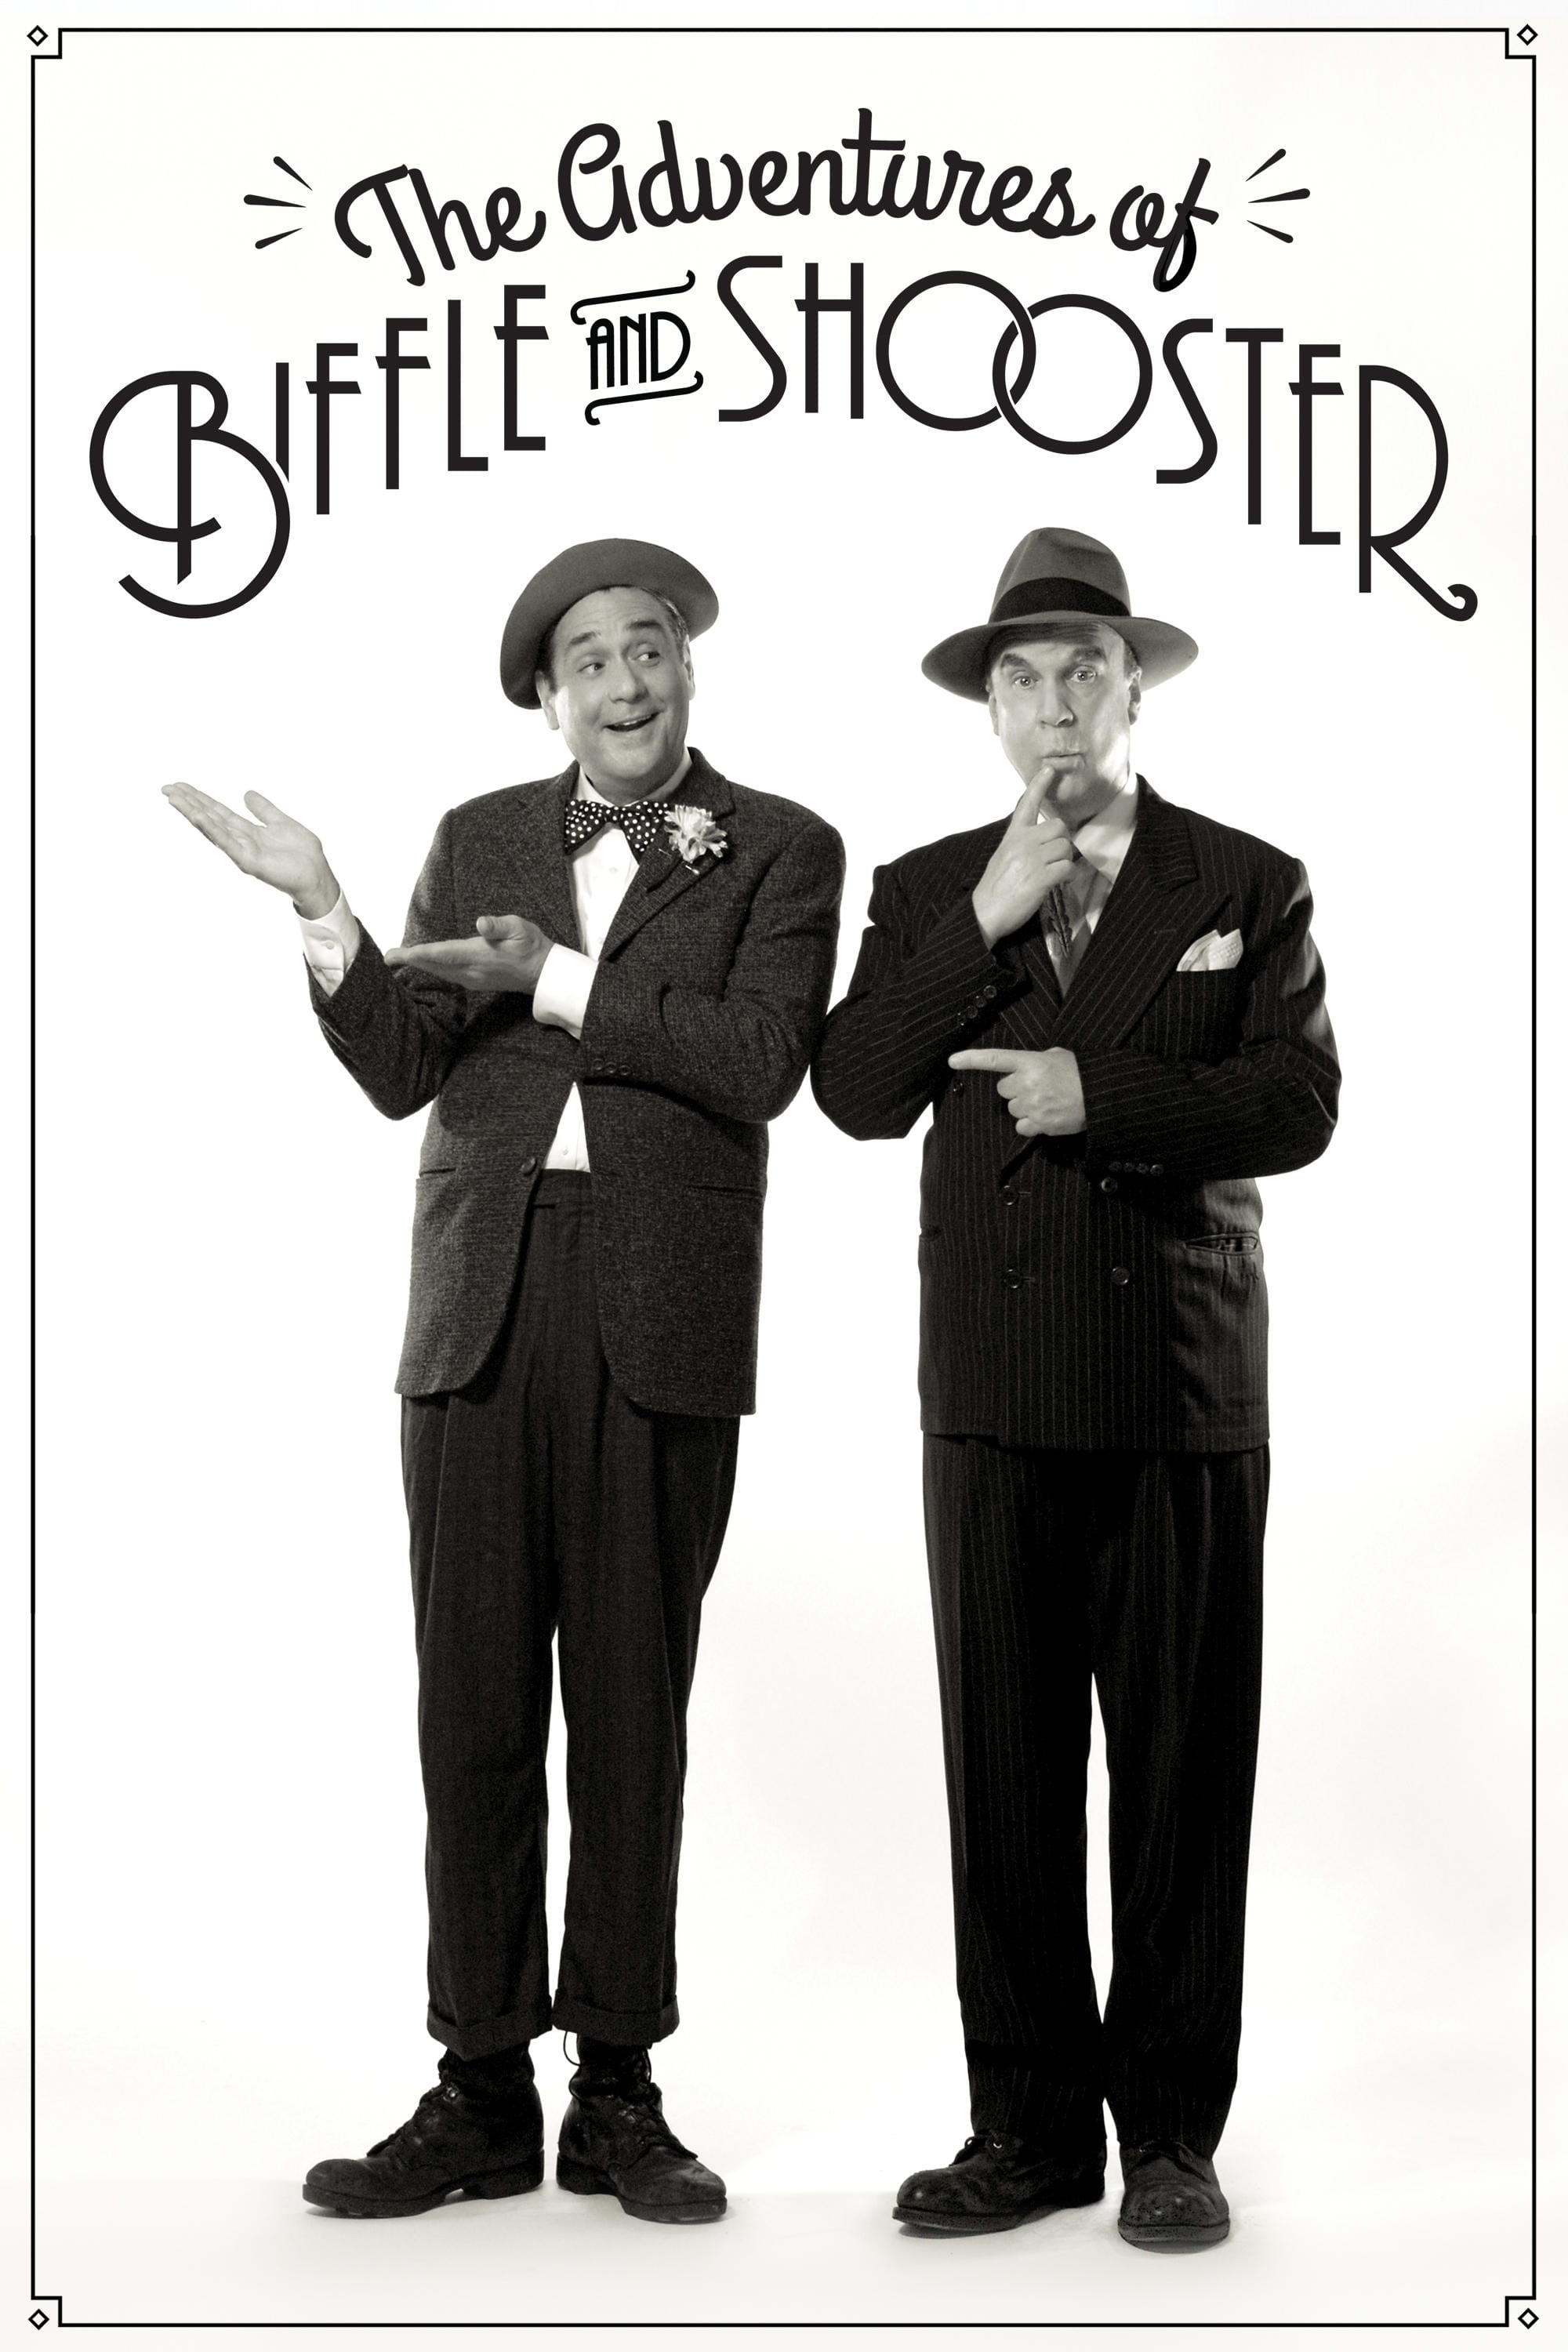 The Adventures of Biffle and Shooster (2015)